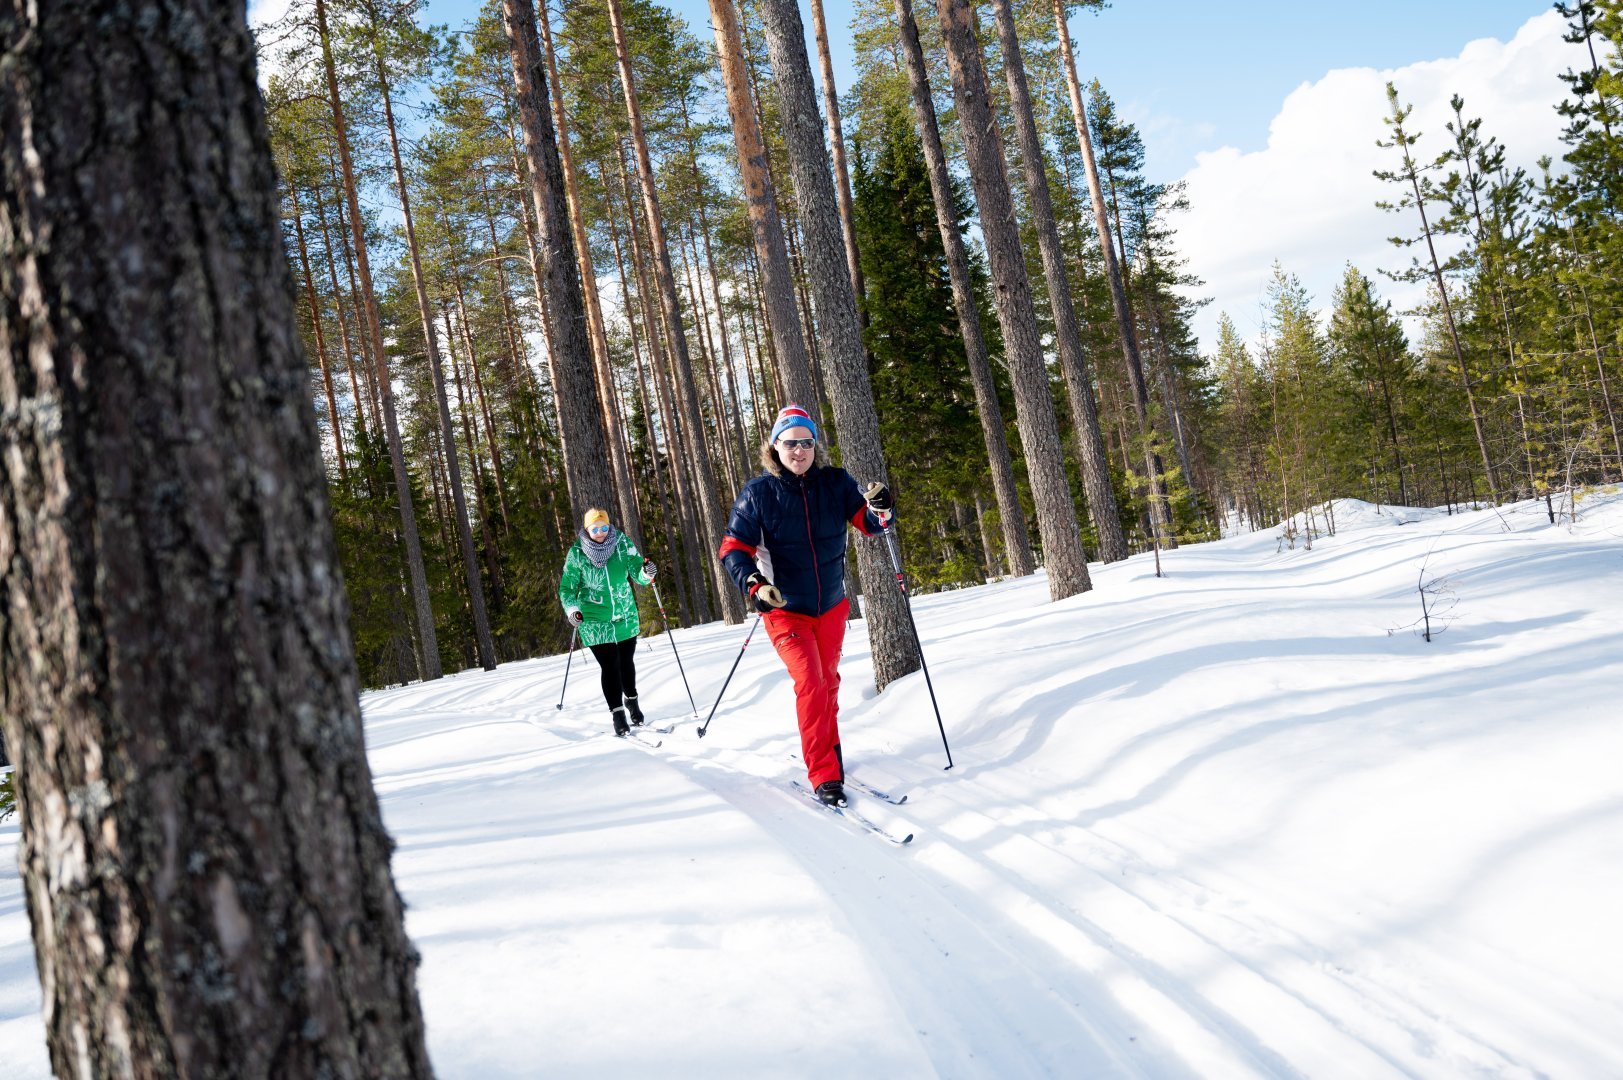 Explore untouched wilderness on our cross-country skiing tours